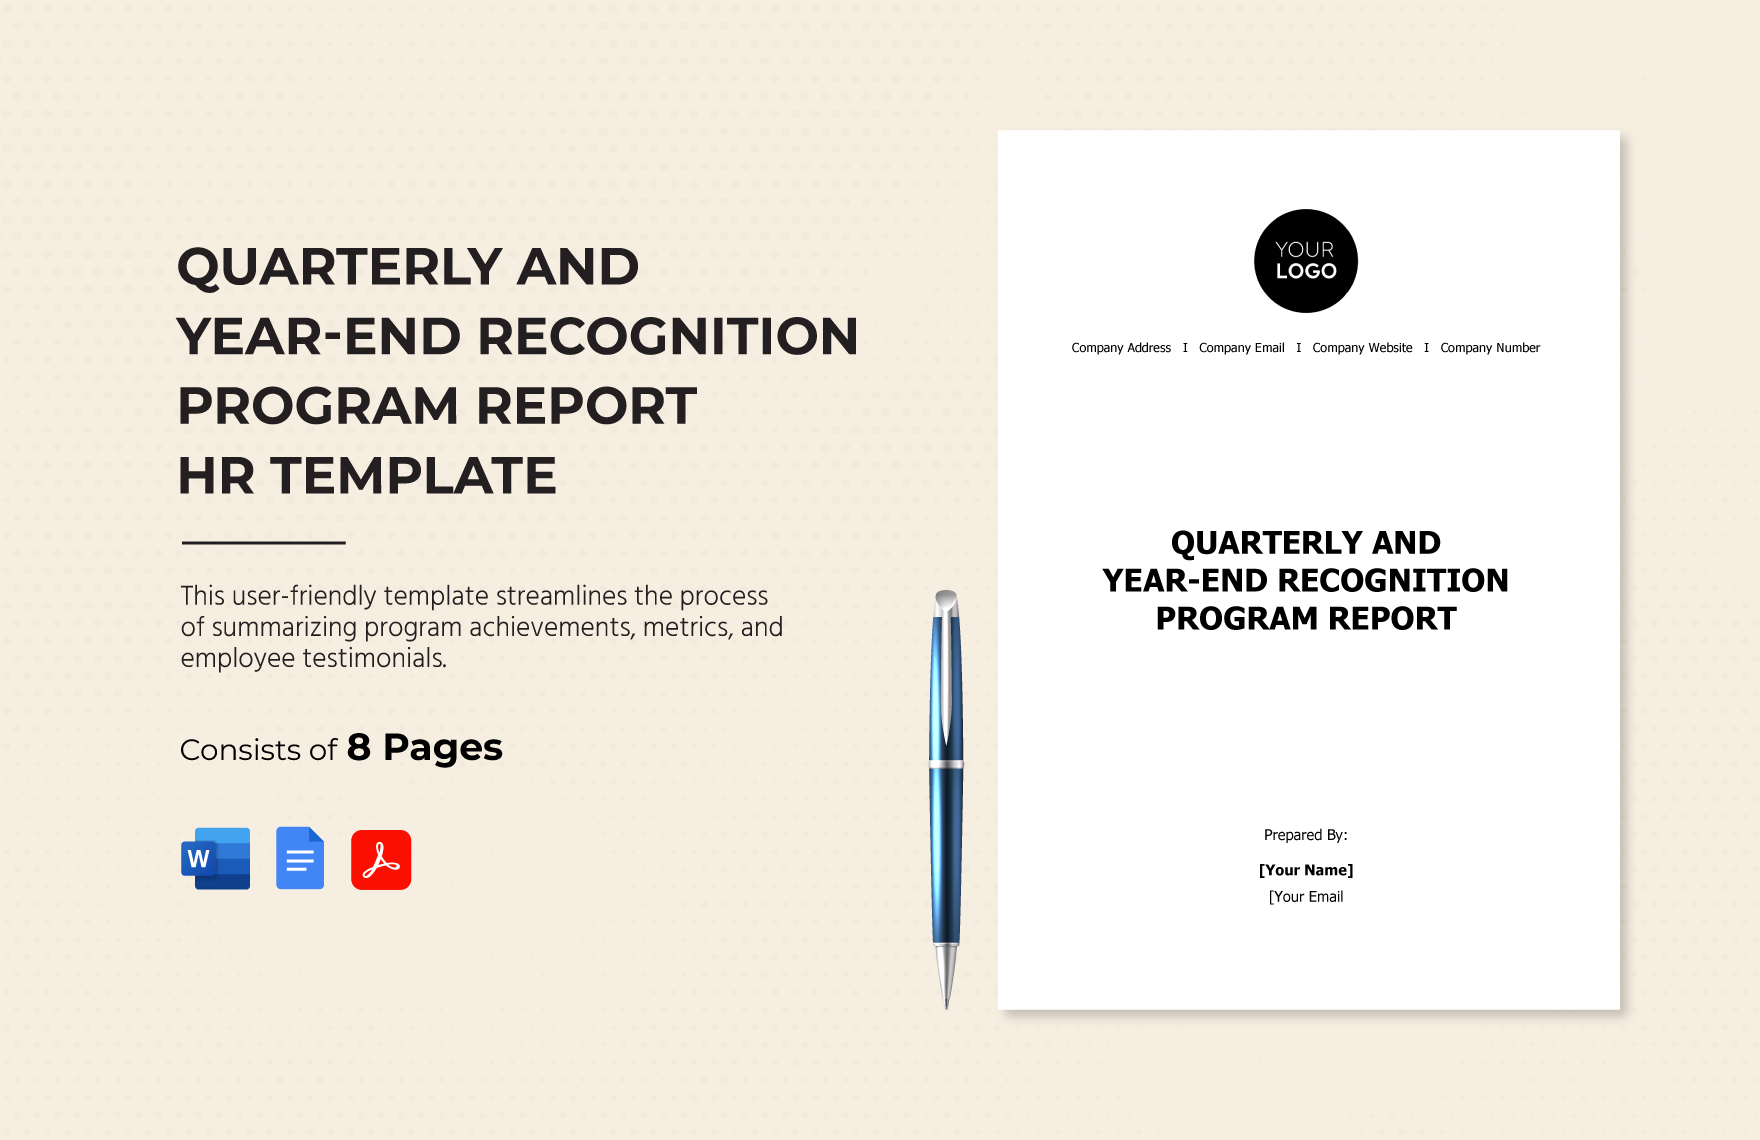 Quarterly and Year-end Recognition Program Report HR Template